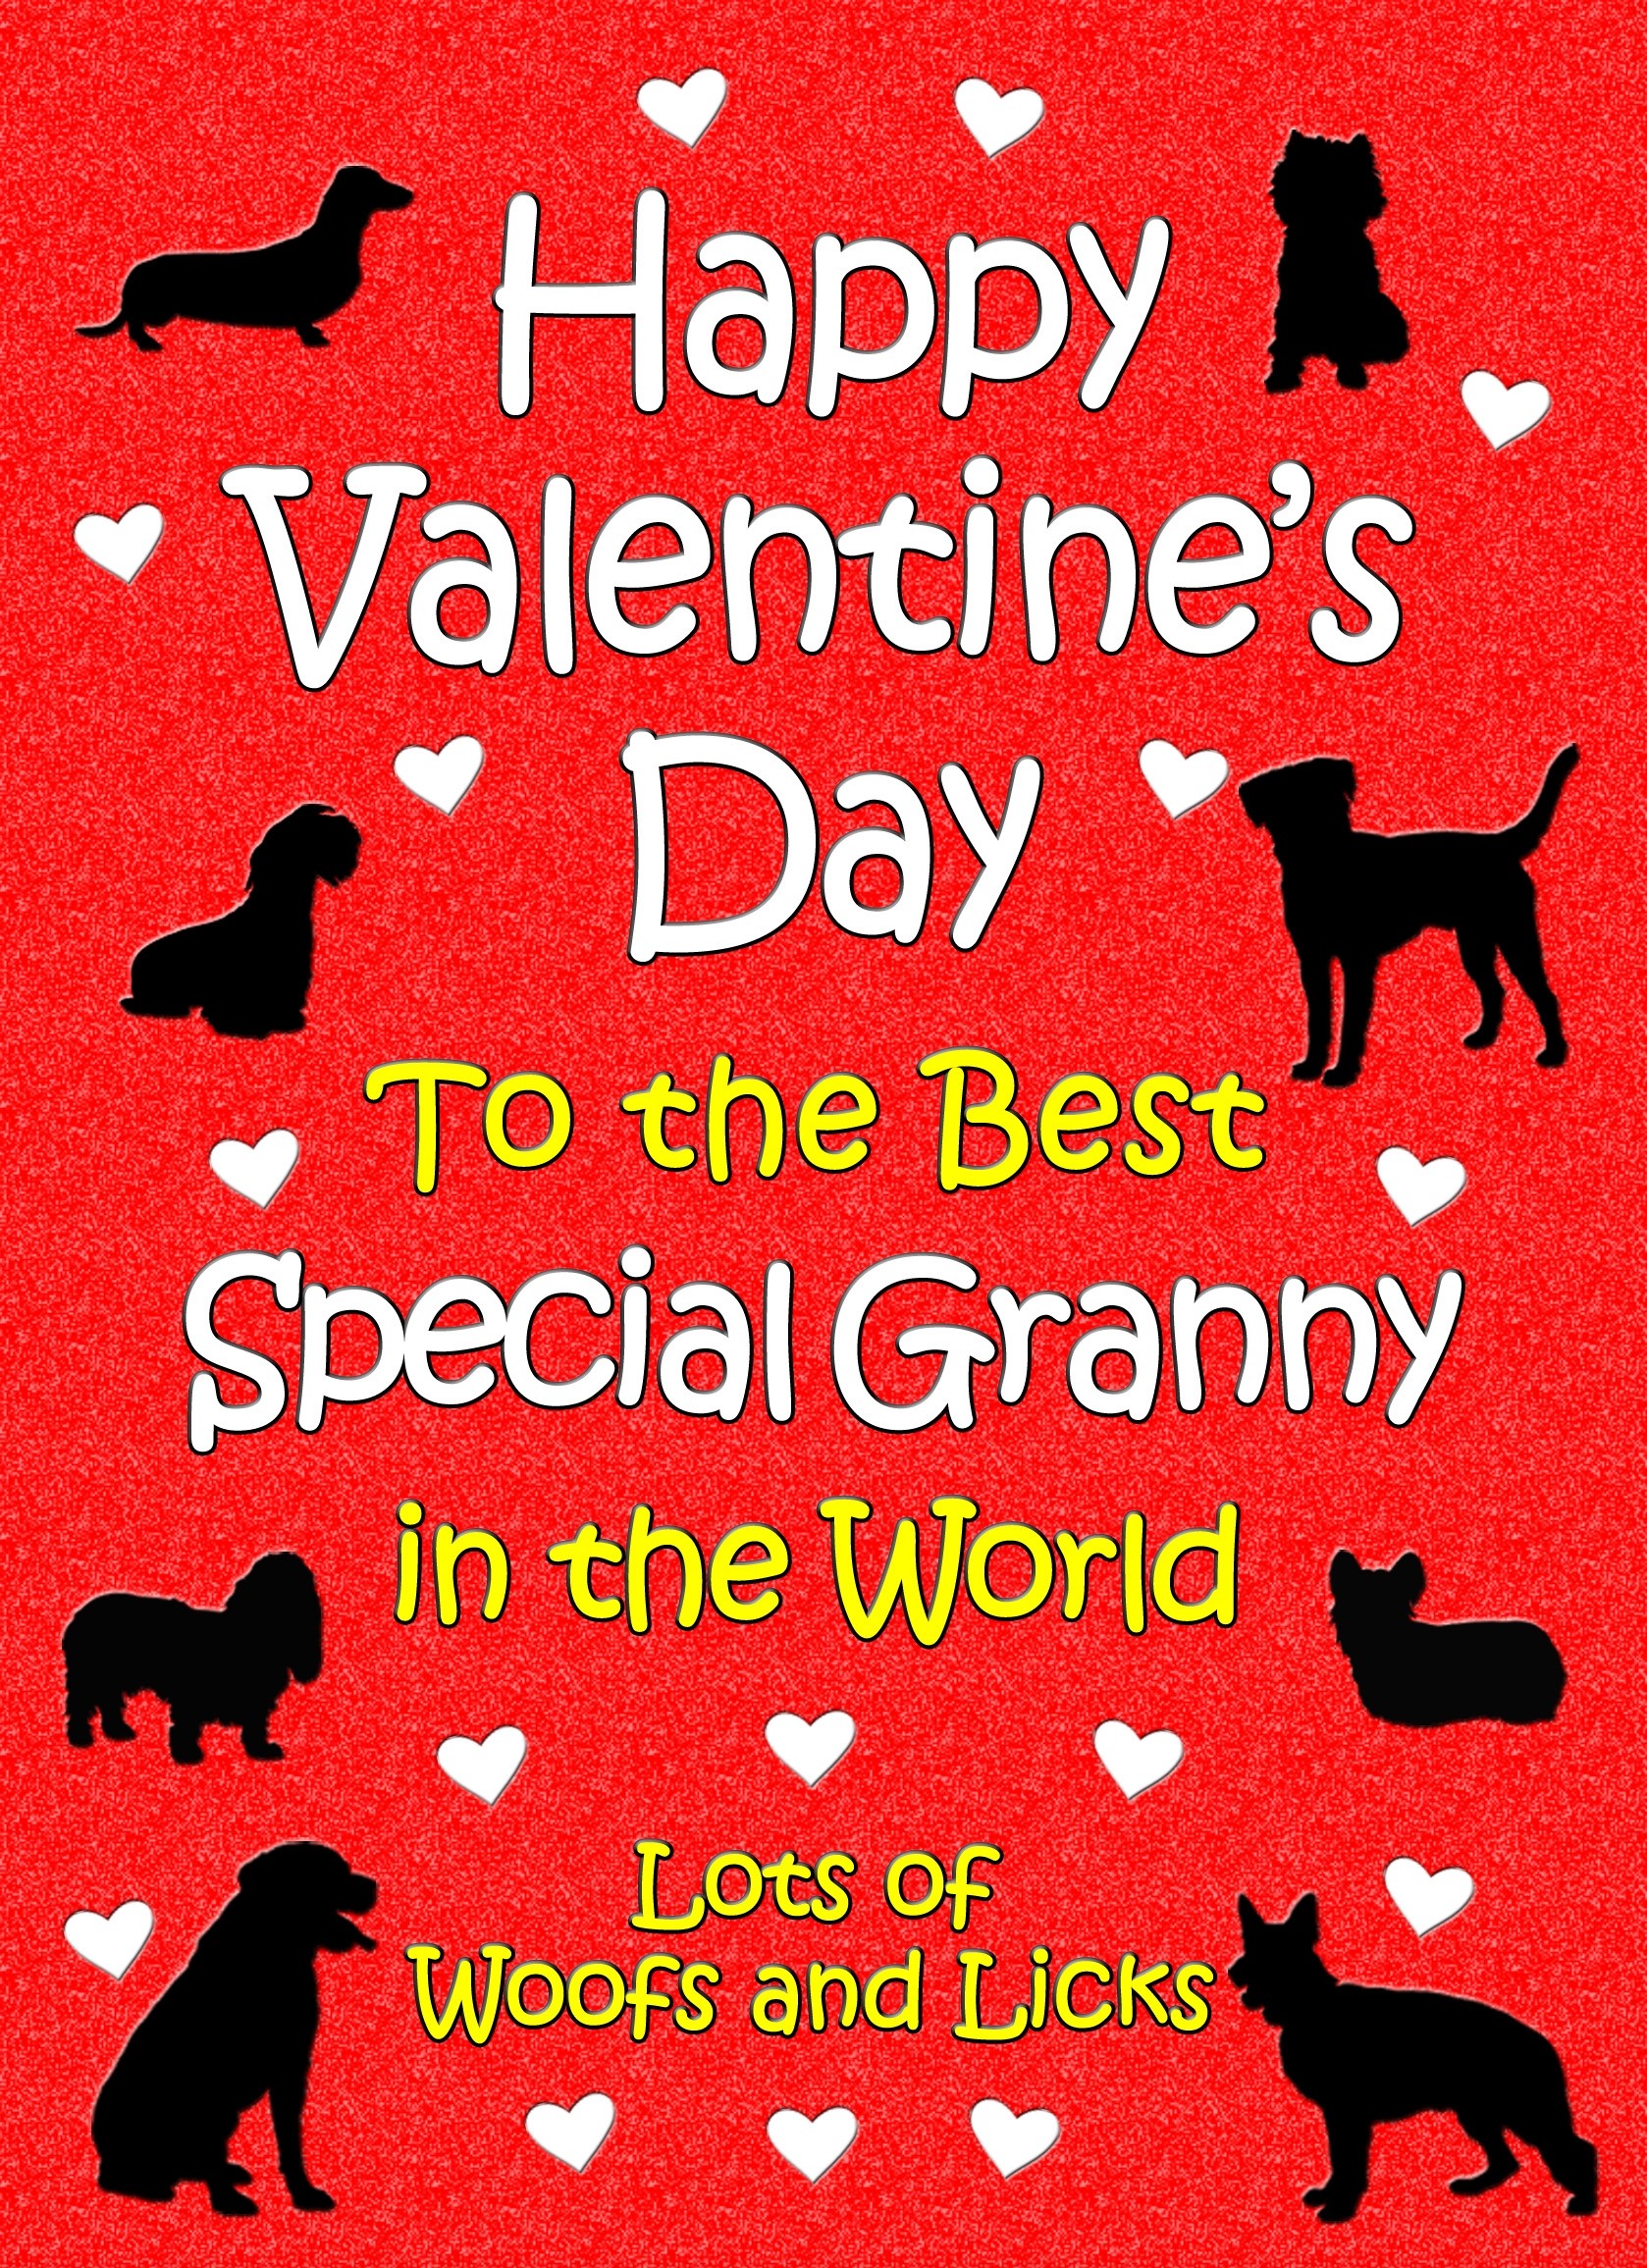 From The Dog Valentines Day Card (Special Granny)